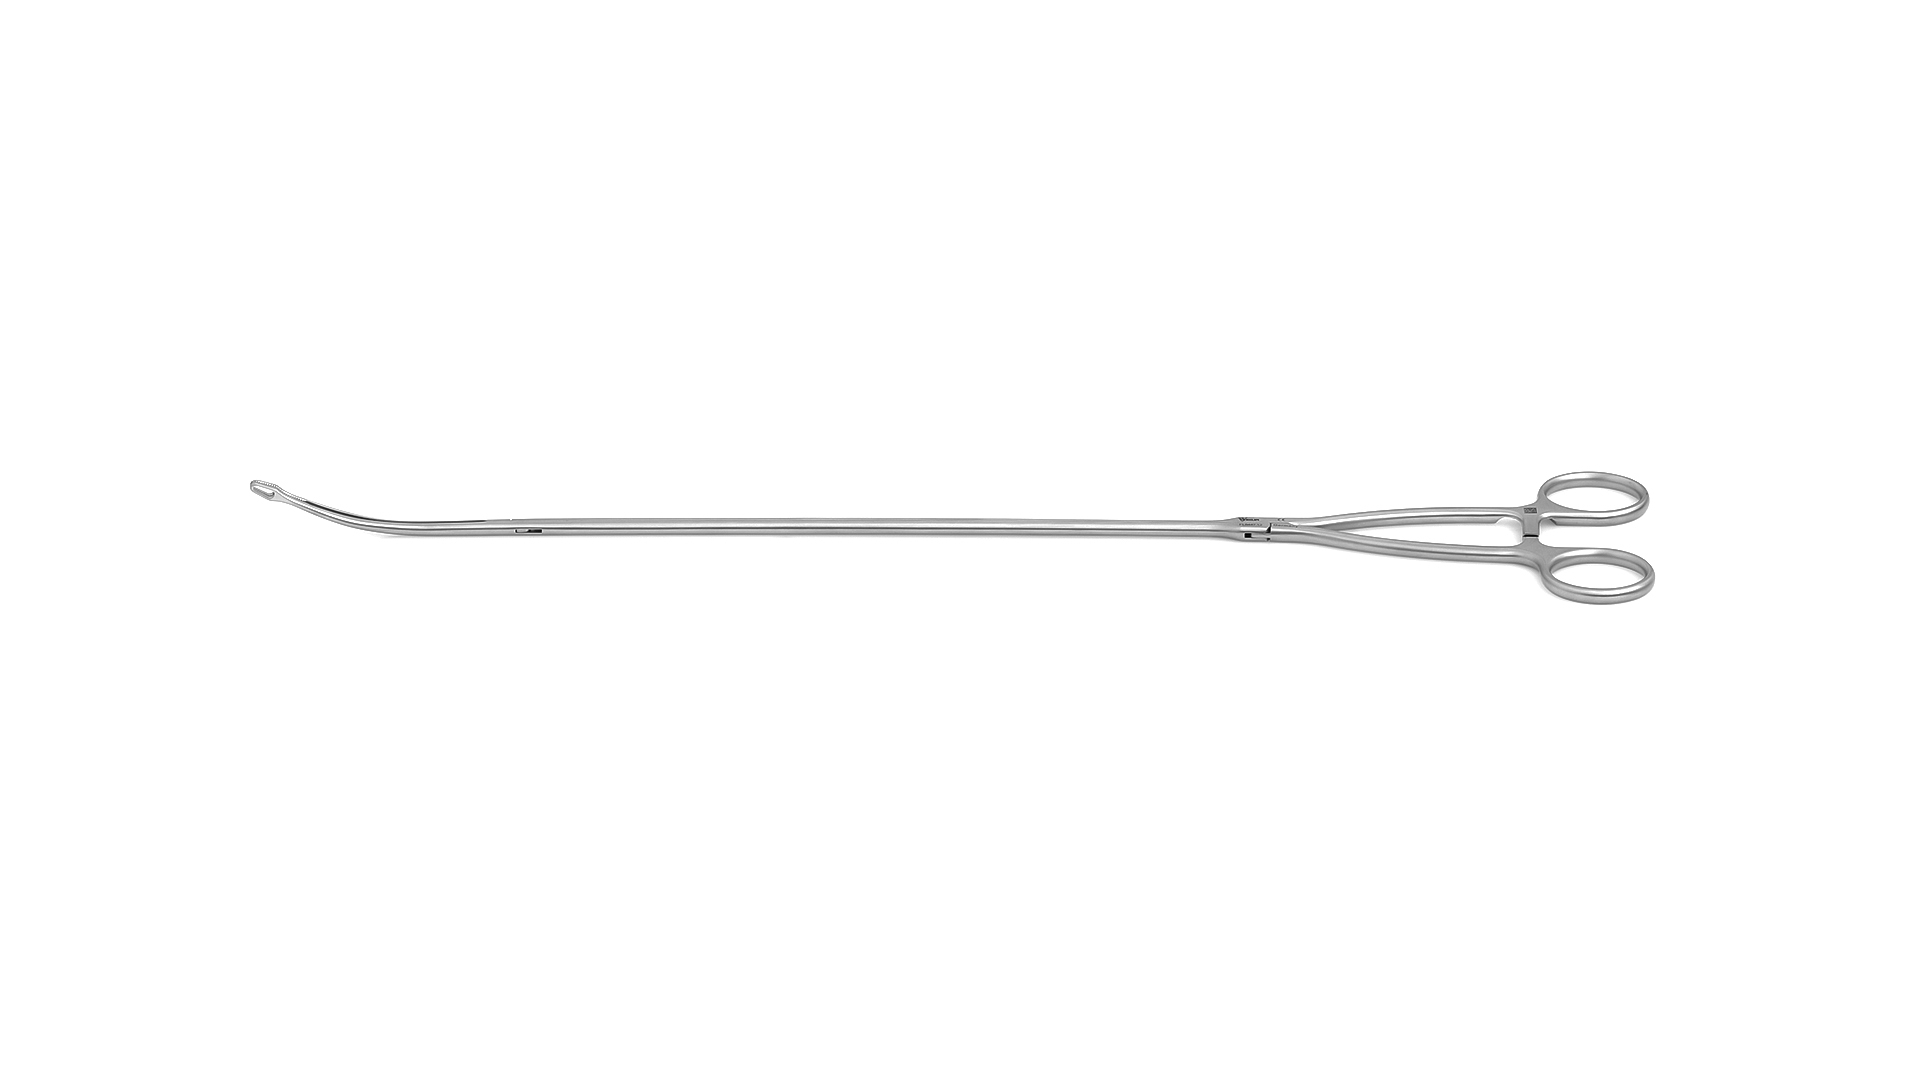 VATS Viper Forceps - Curved Left Tapered 5mm to 3mm Viper-head Shaped Atraumatic Serrated Jaws